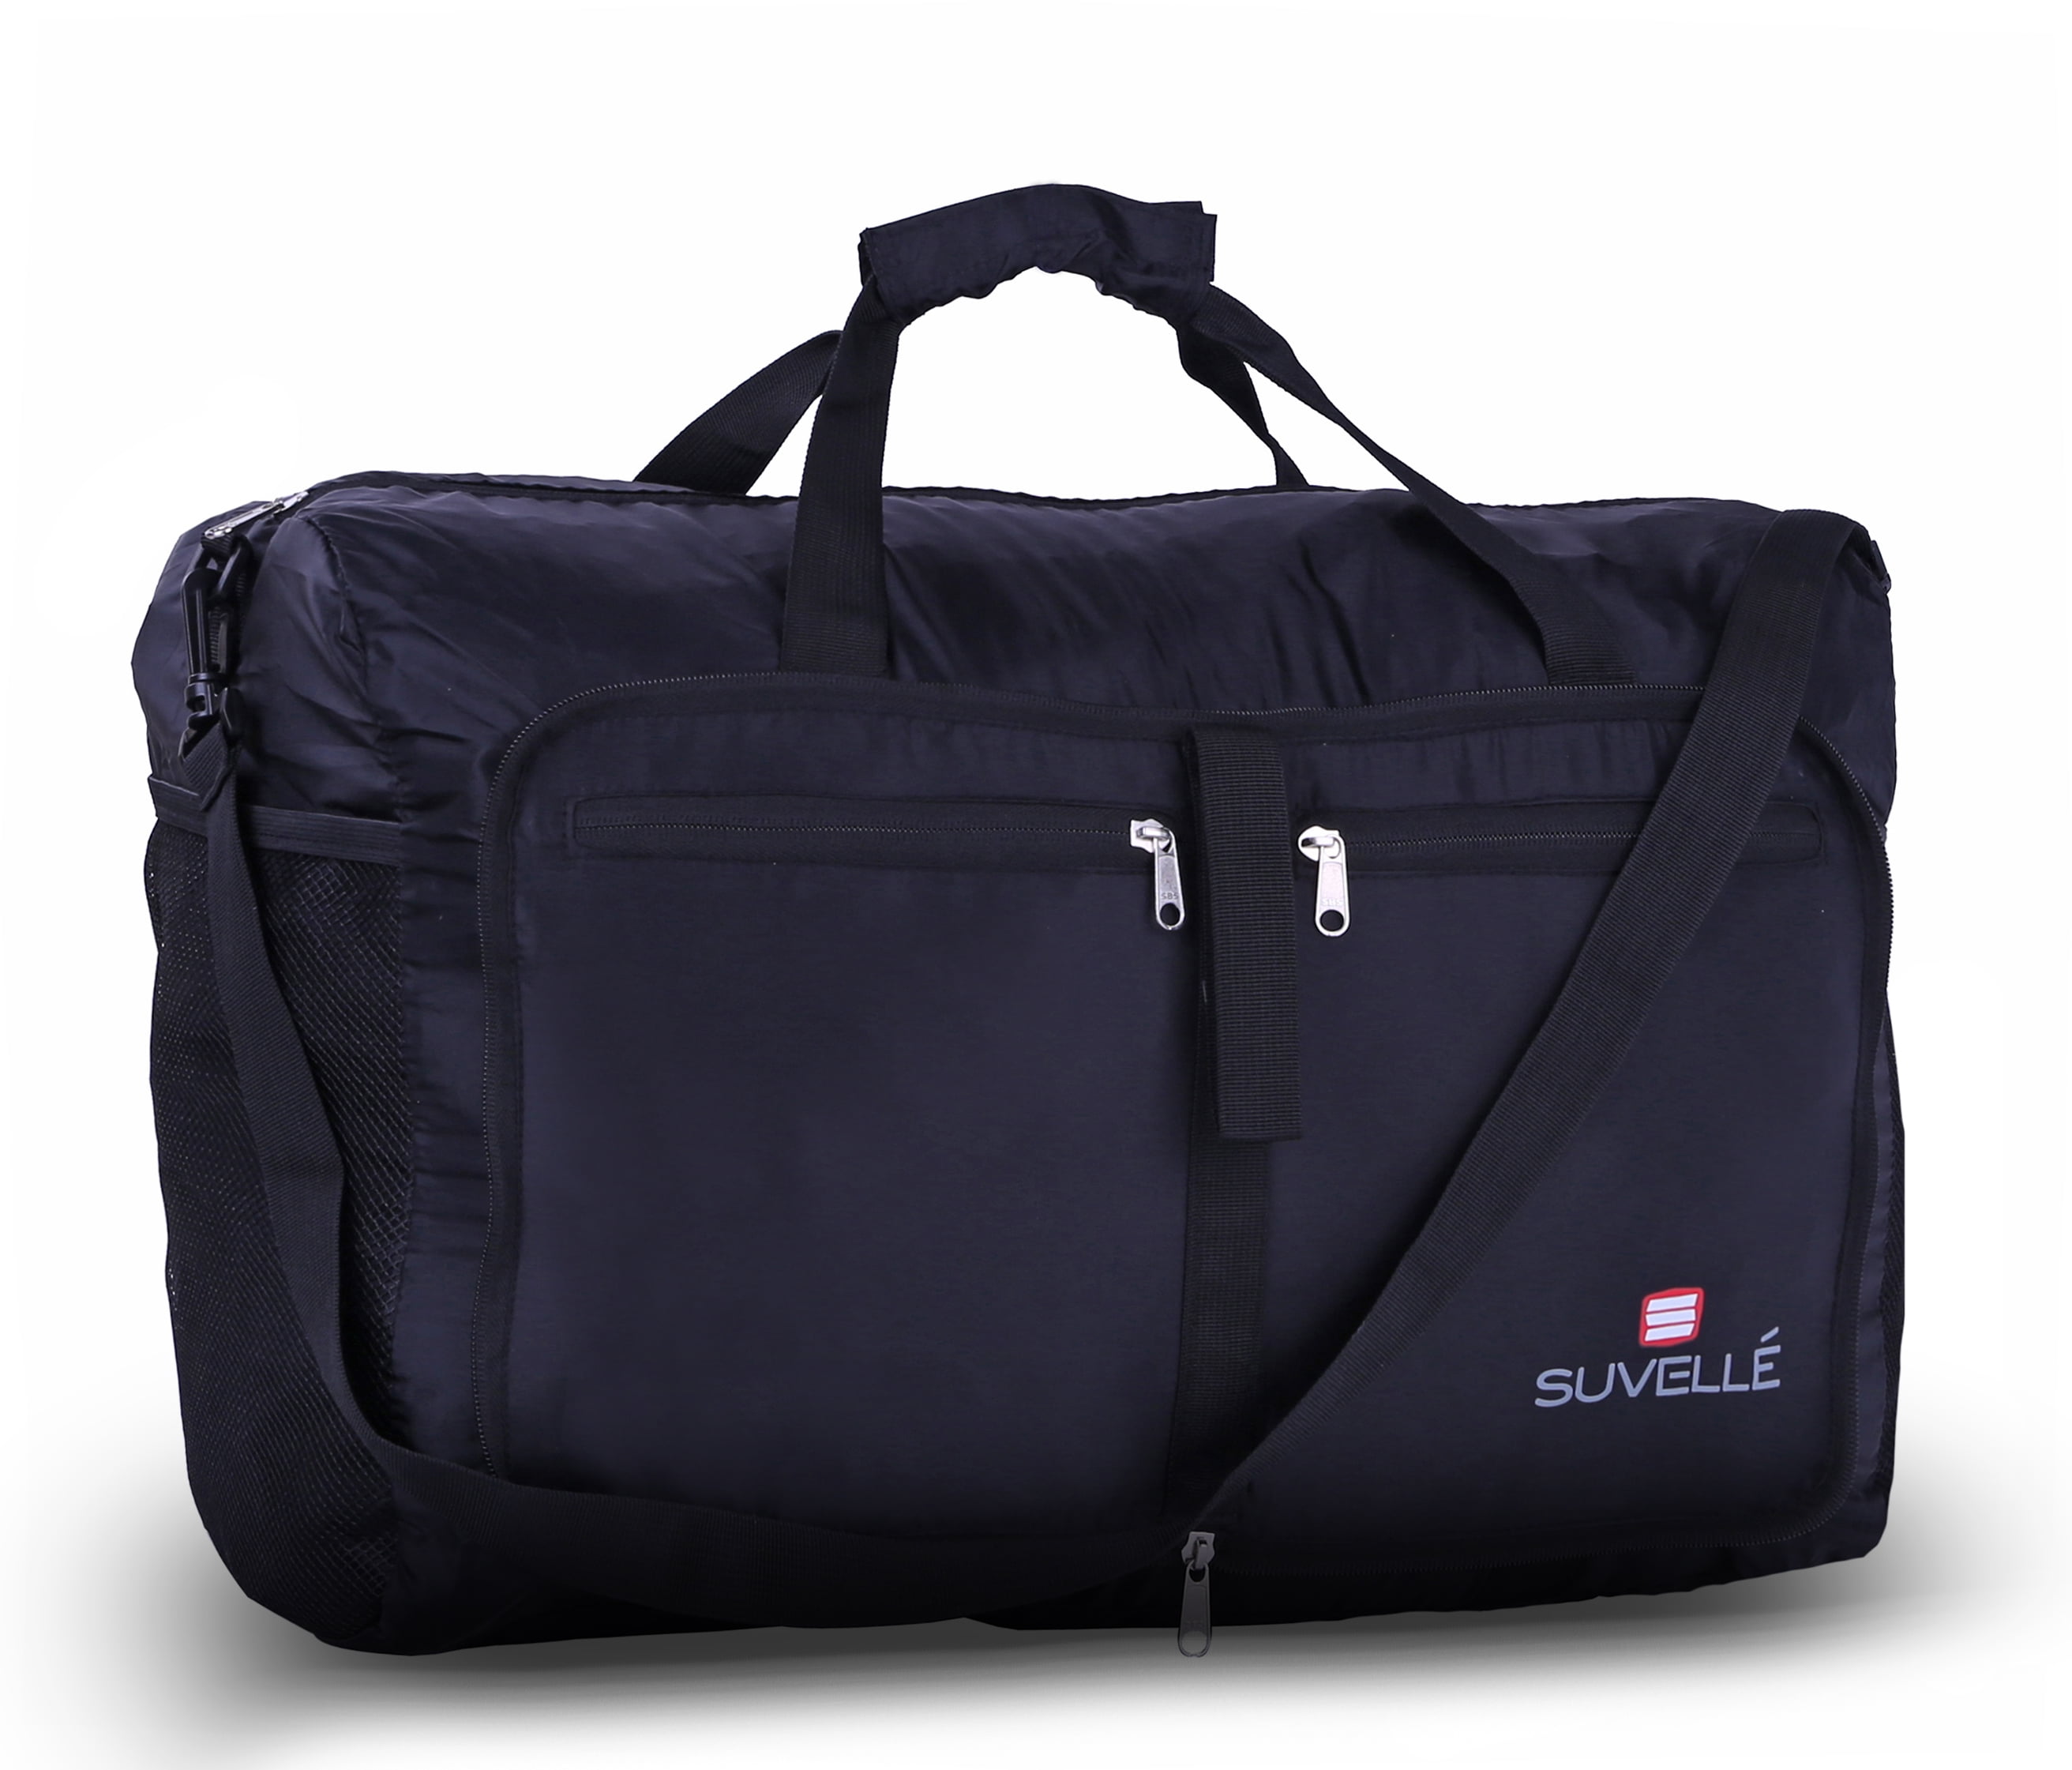 SUVELLÉ Suvelle Lightweight 21 Travel Foldable Duffel Bag for Luggage Gym Sports Water Resistant Nylon Duffle 